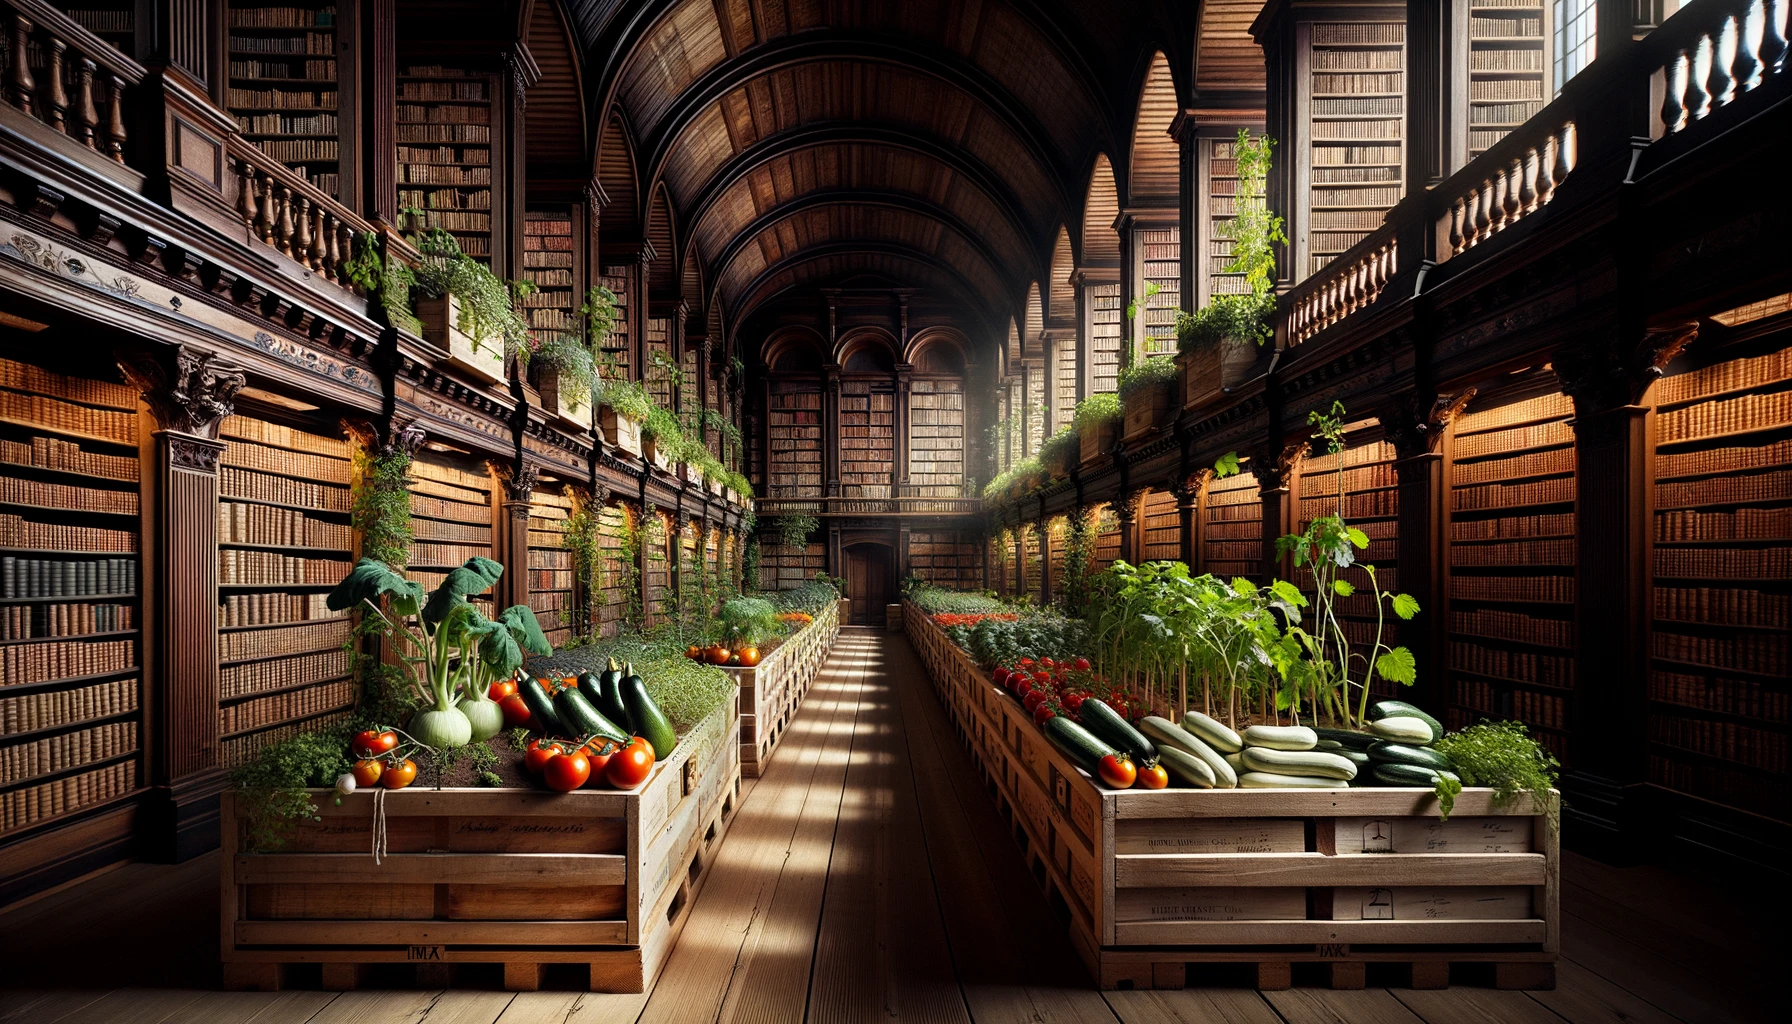 Library with fruits, vegetables, and herbs growing out of the shelves.